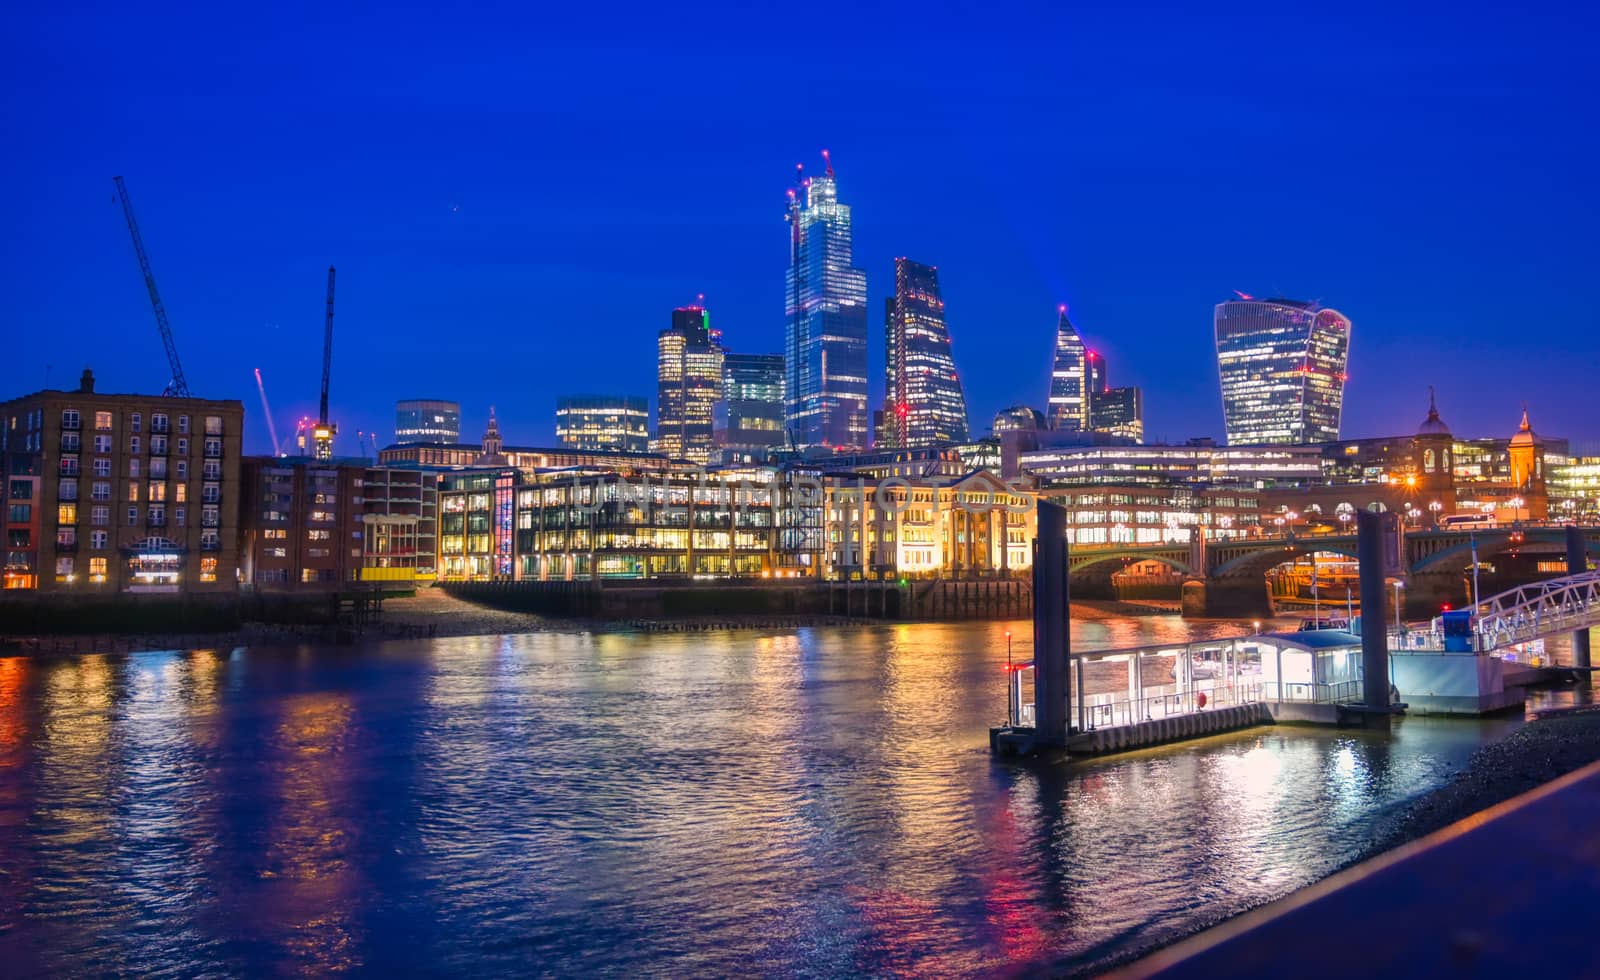 A view of the London skyline across the River Thames in London, UK.